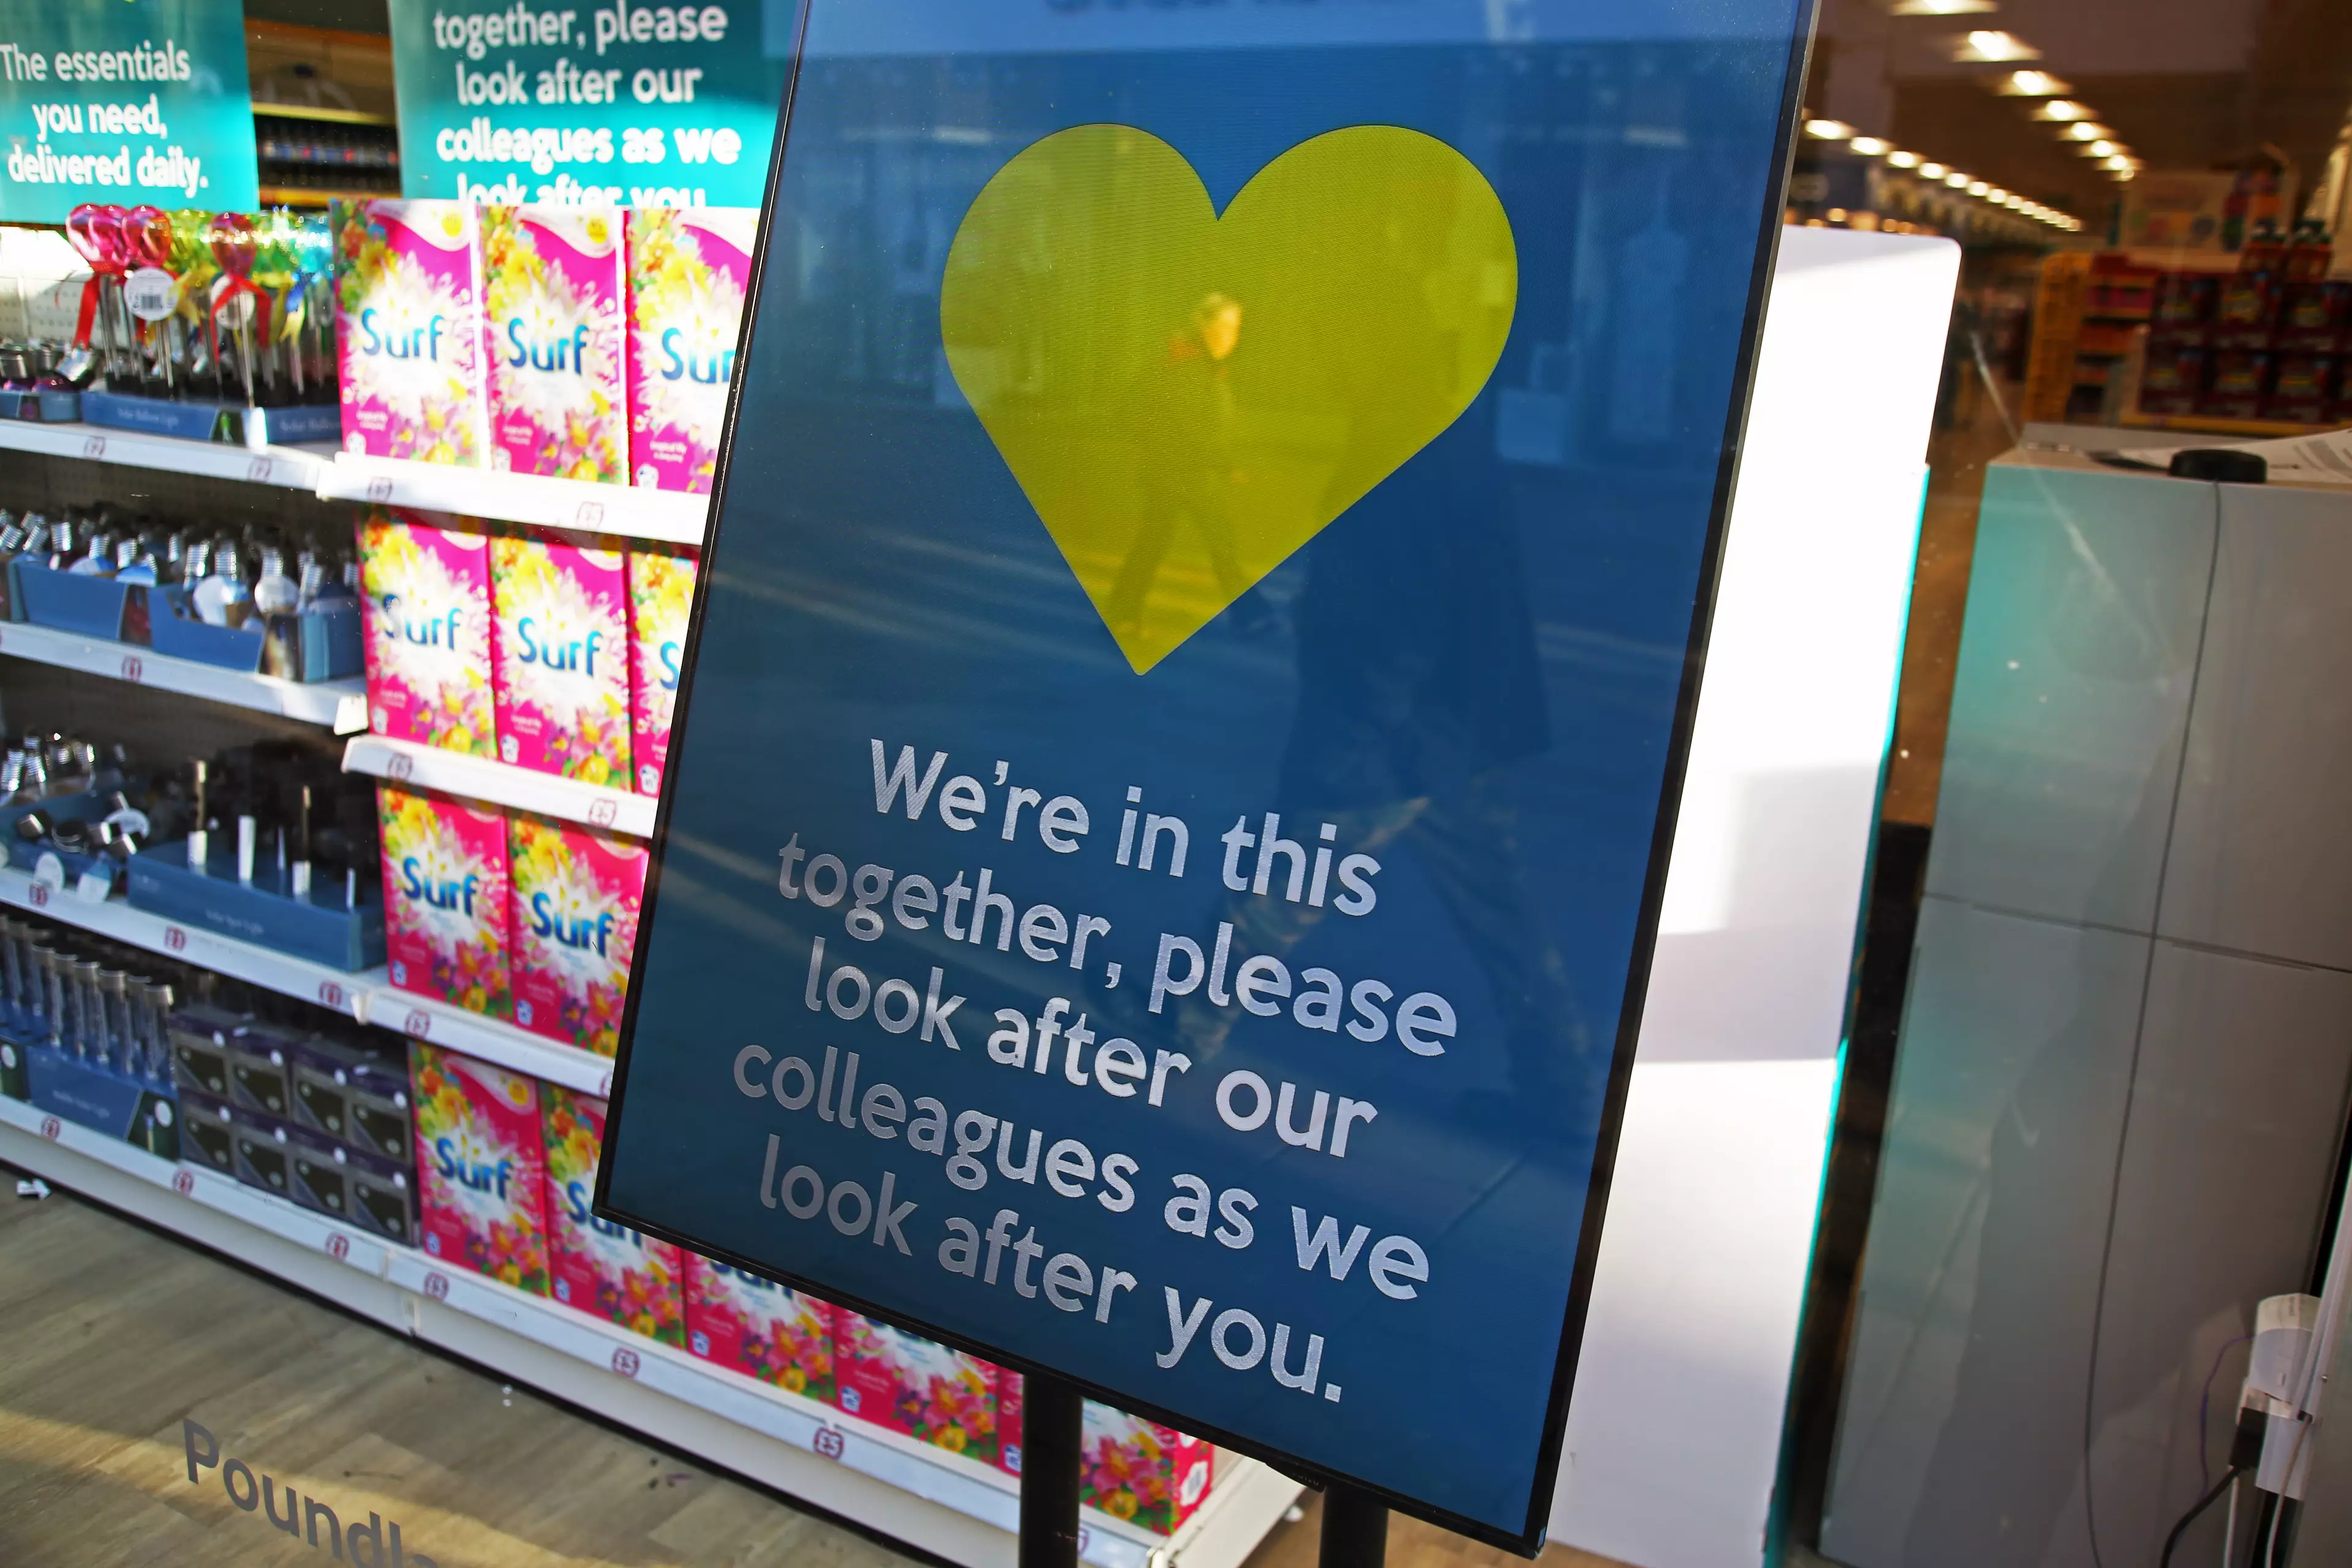 Signs asking shoppers to be considerate have been put up.